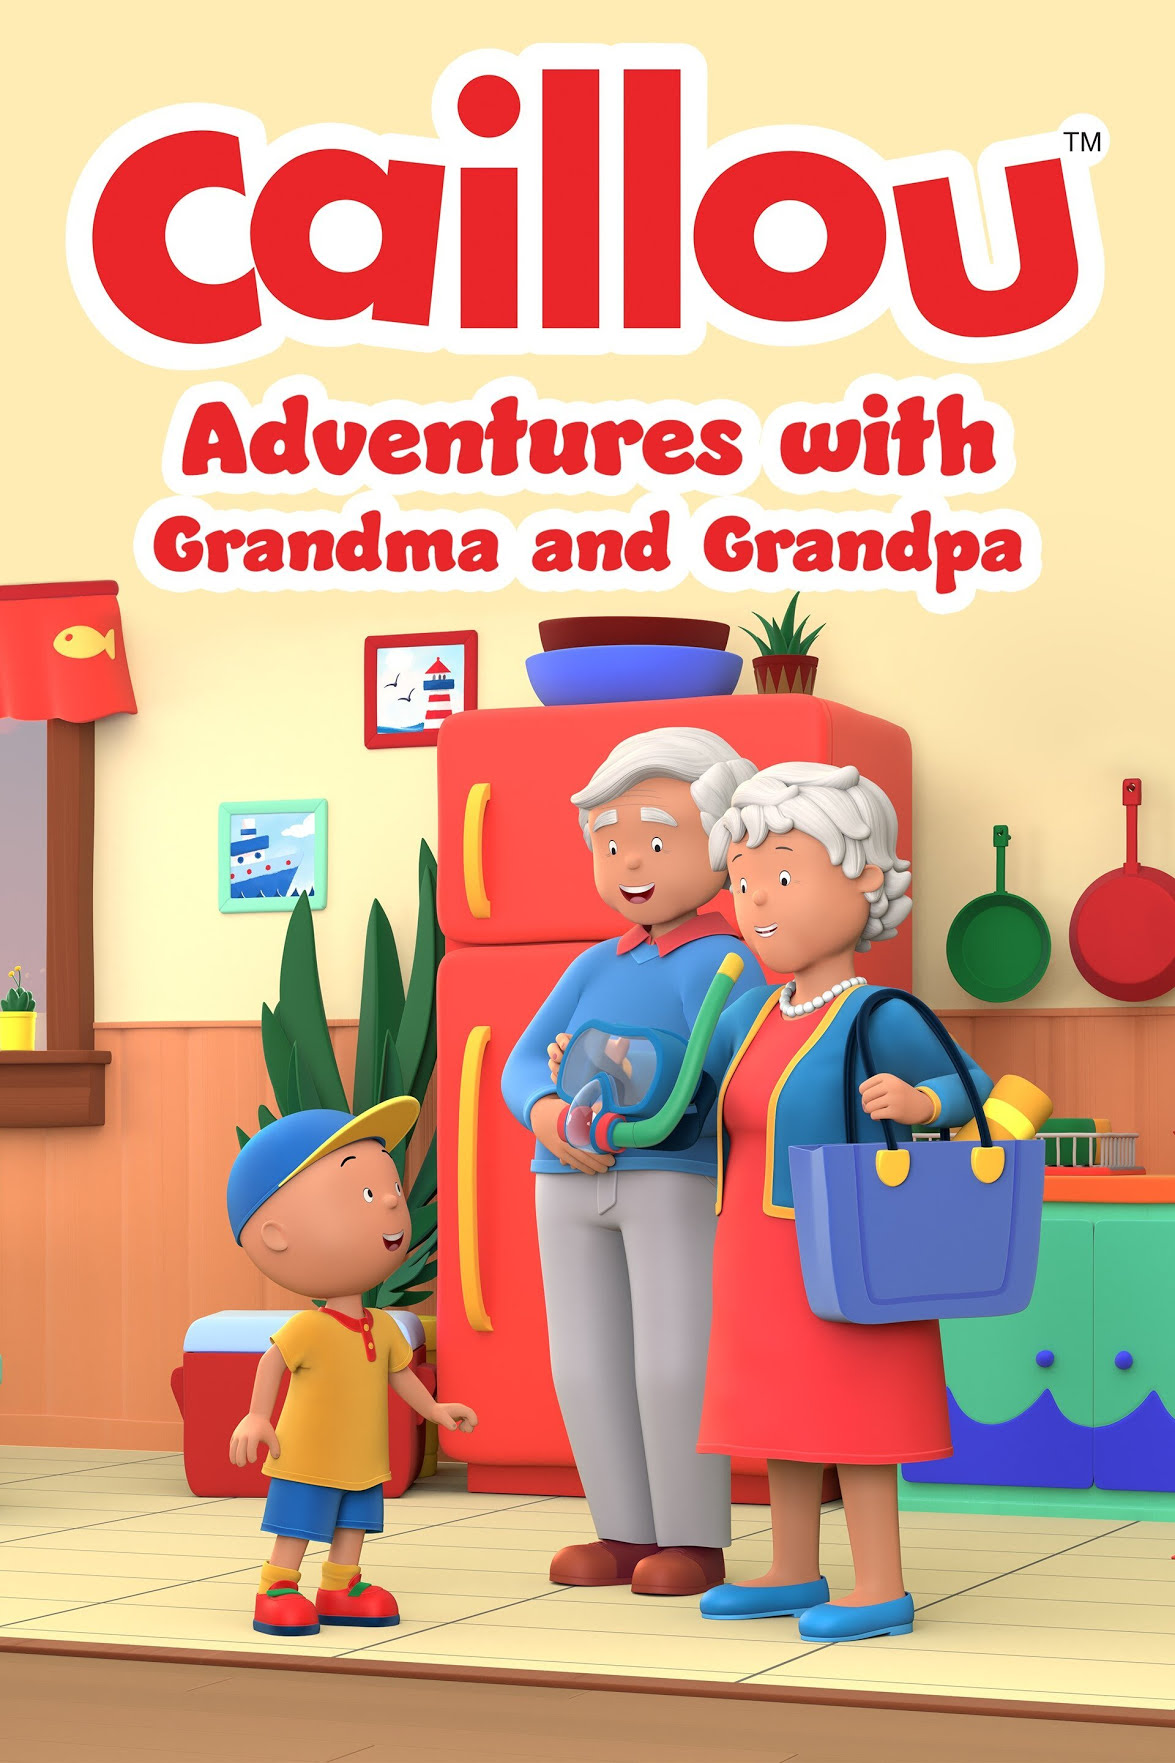 Caillou: Adventures with Grandma and Grandpa 2022 HDRip